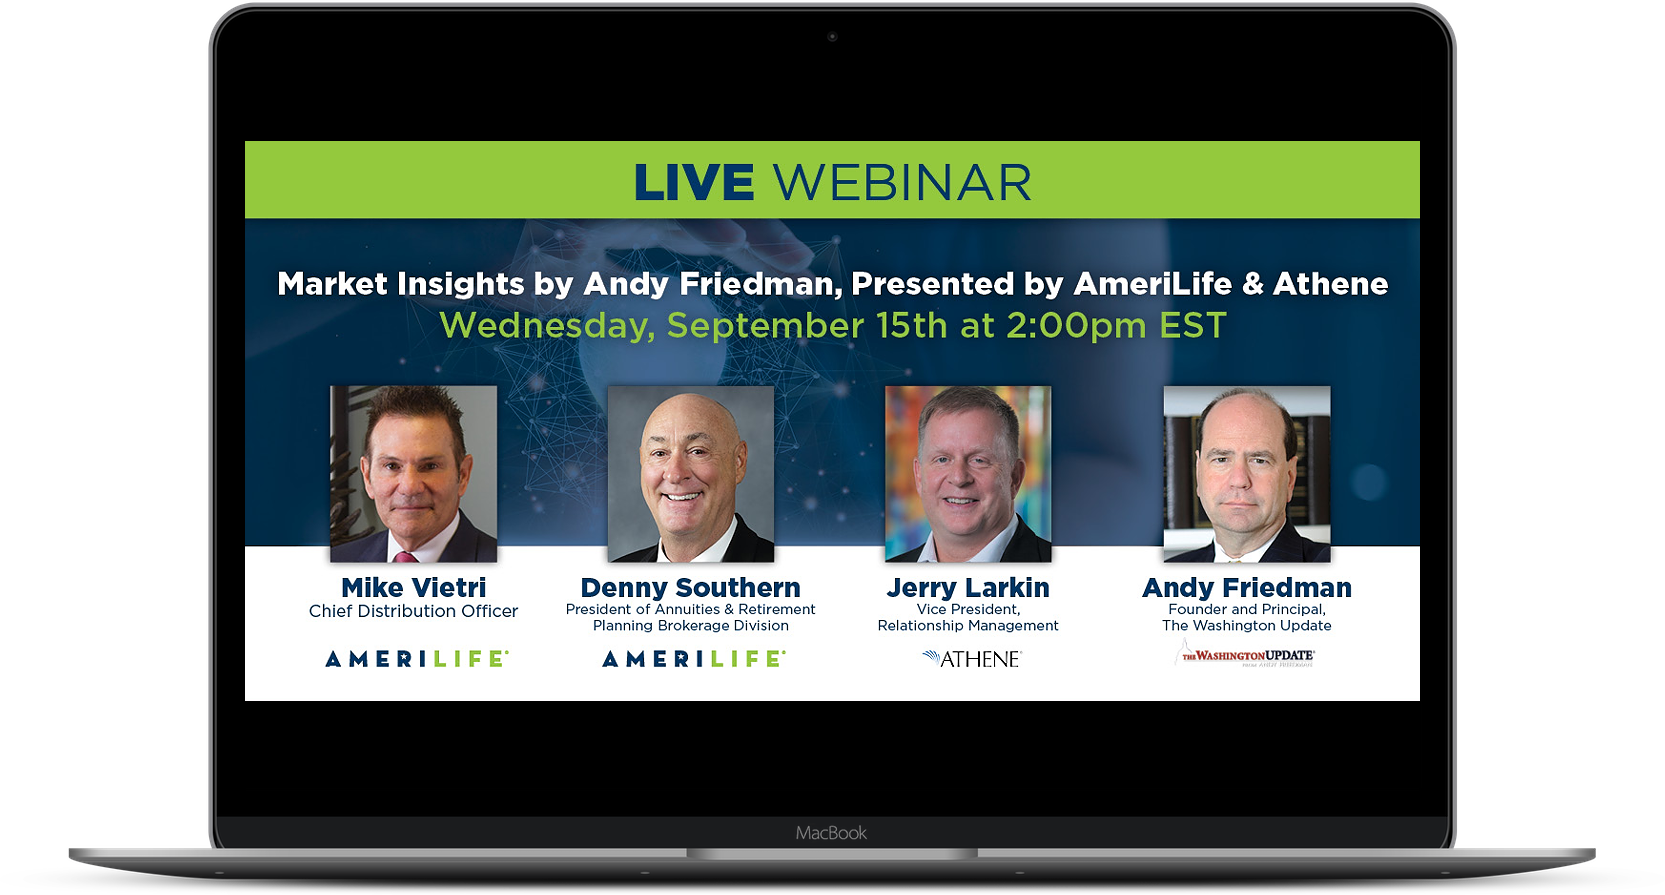 Market Insights by Andy Friedman, Presented by AmeriLife & Athene